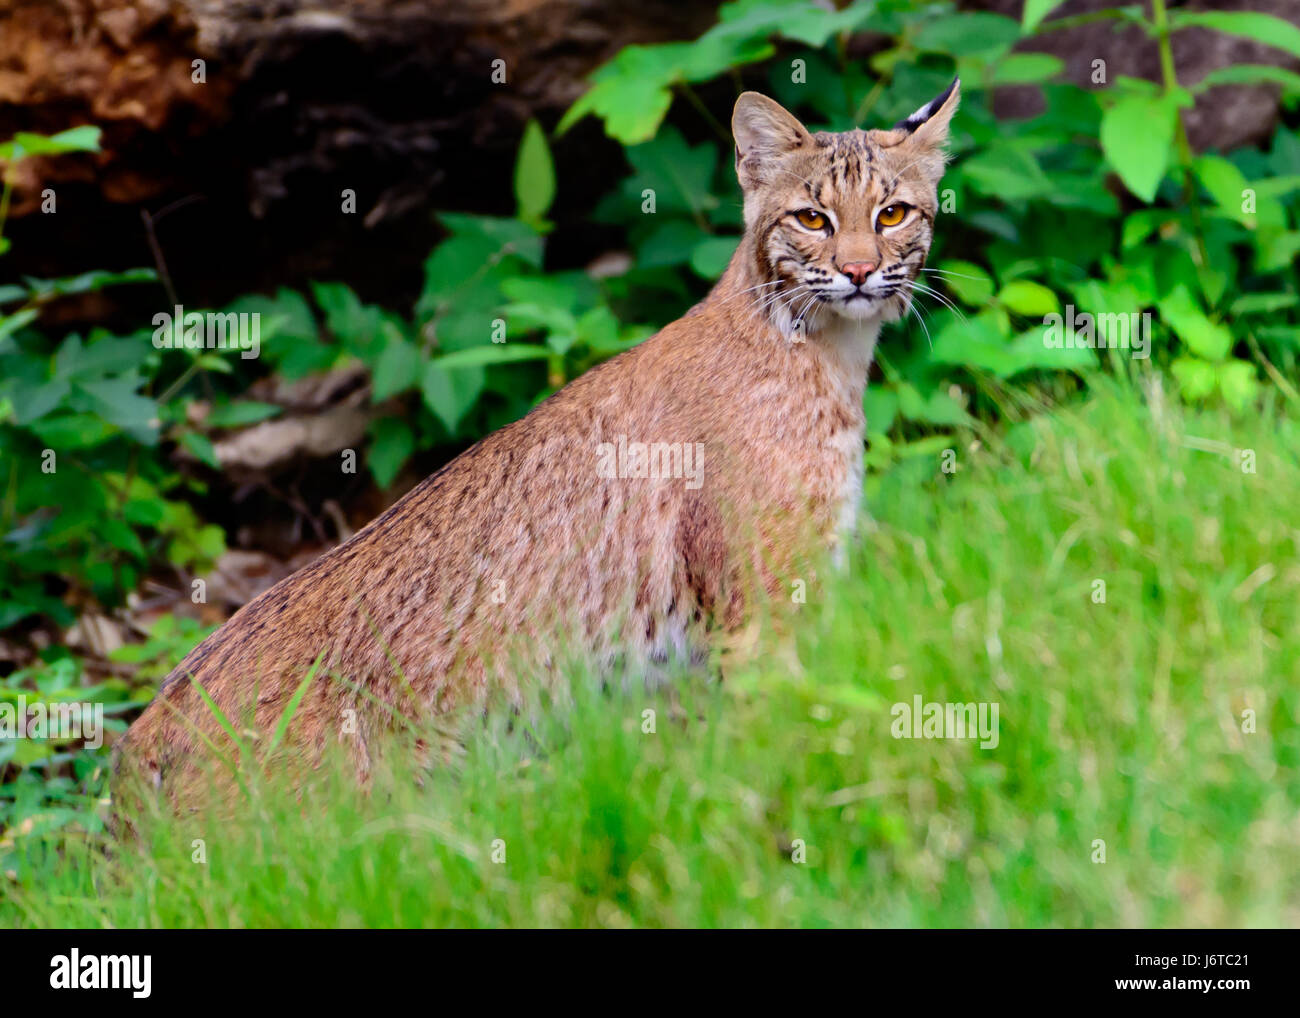 Bobcat (Lynx rufus texensis) standing on a creekbank One ear forward, one to the side with curious look. Stock Photo